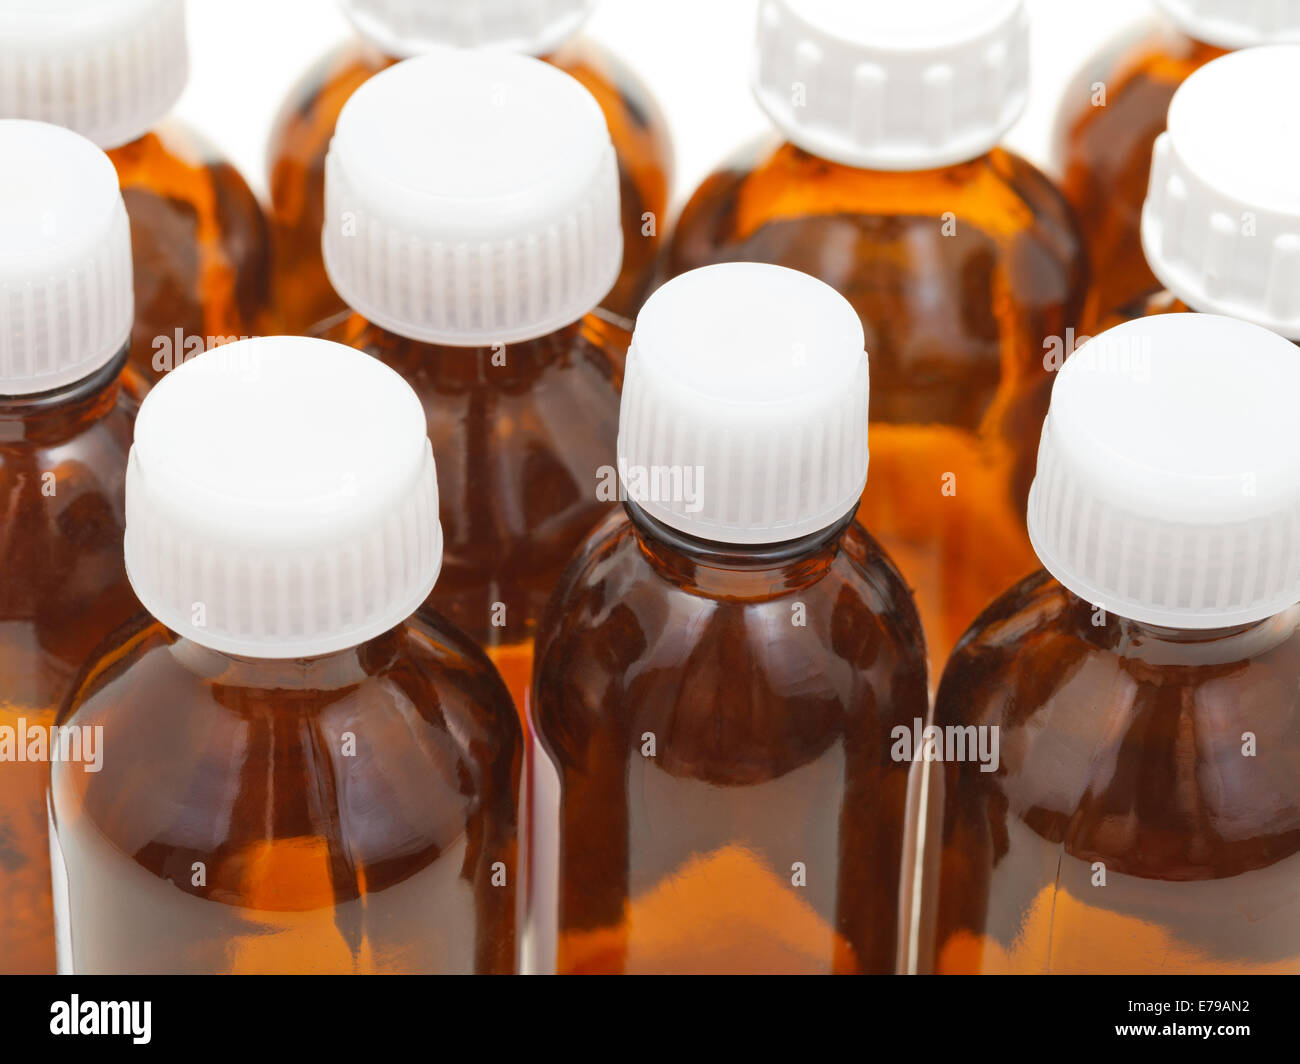 many small closed brown glass oval pharmacy bottles close up Stock Photo